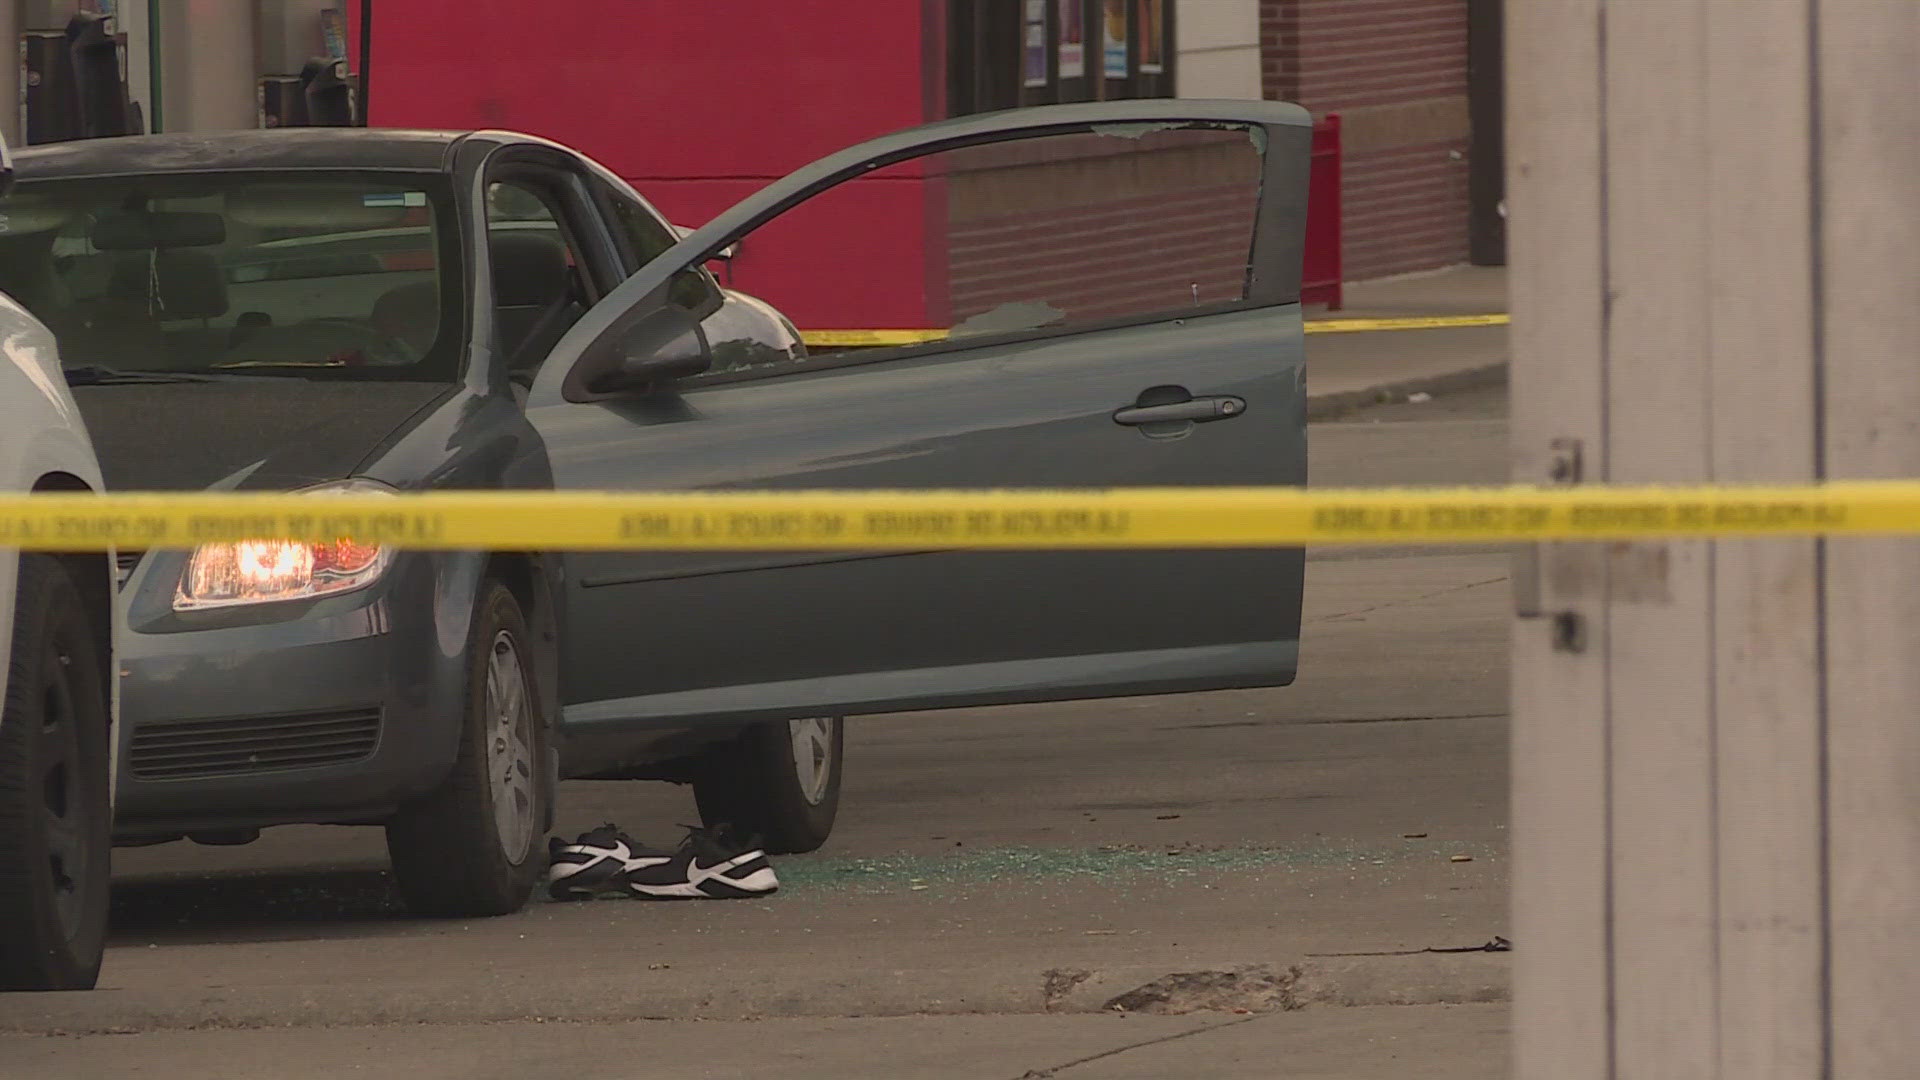 The shooting happened near West 5th Avenue and Sheridan Boulevard Saturday evening.